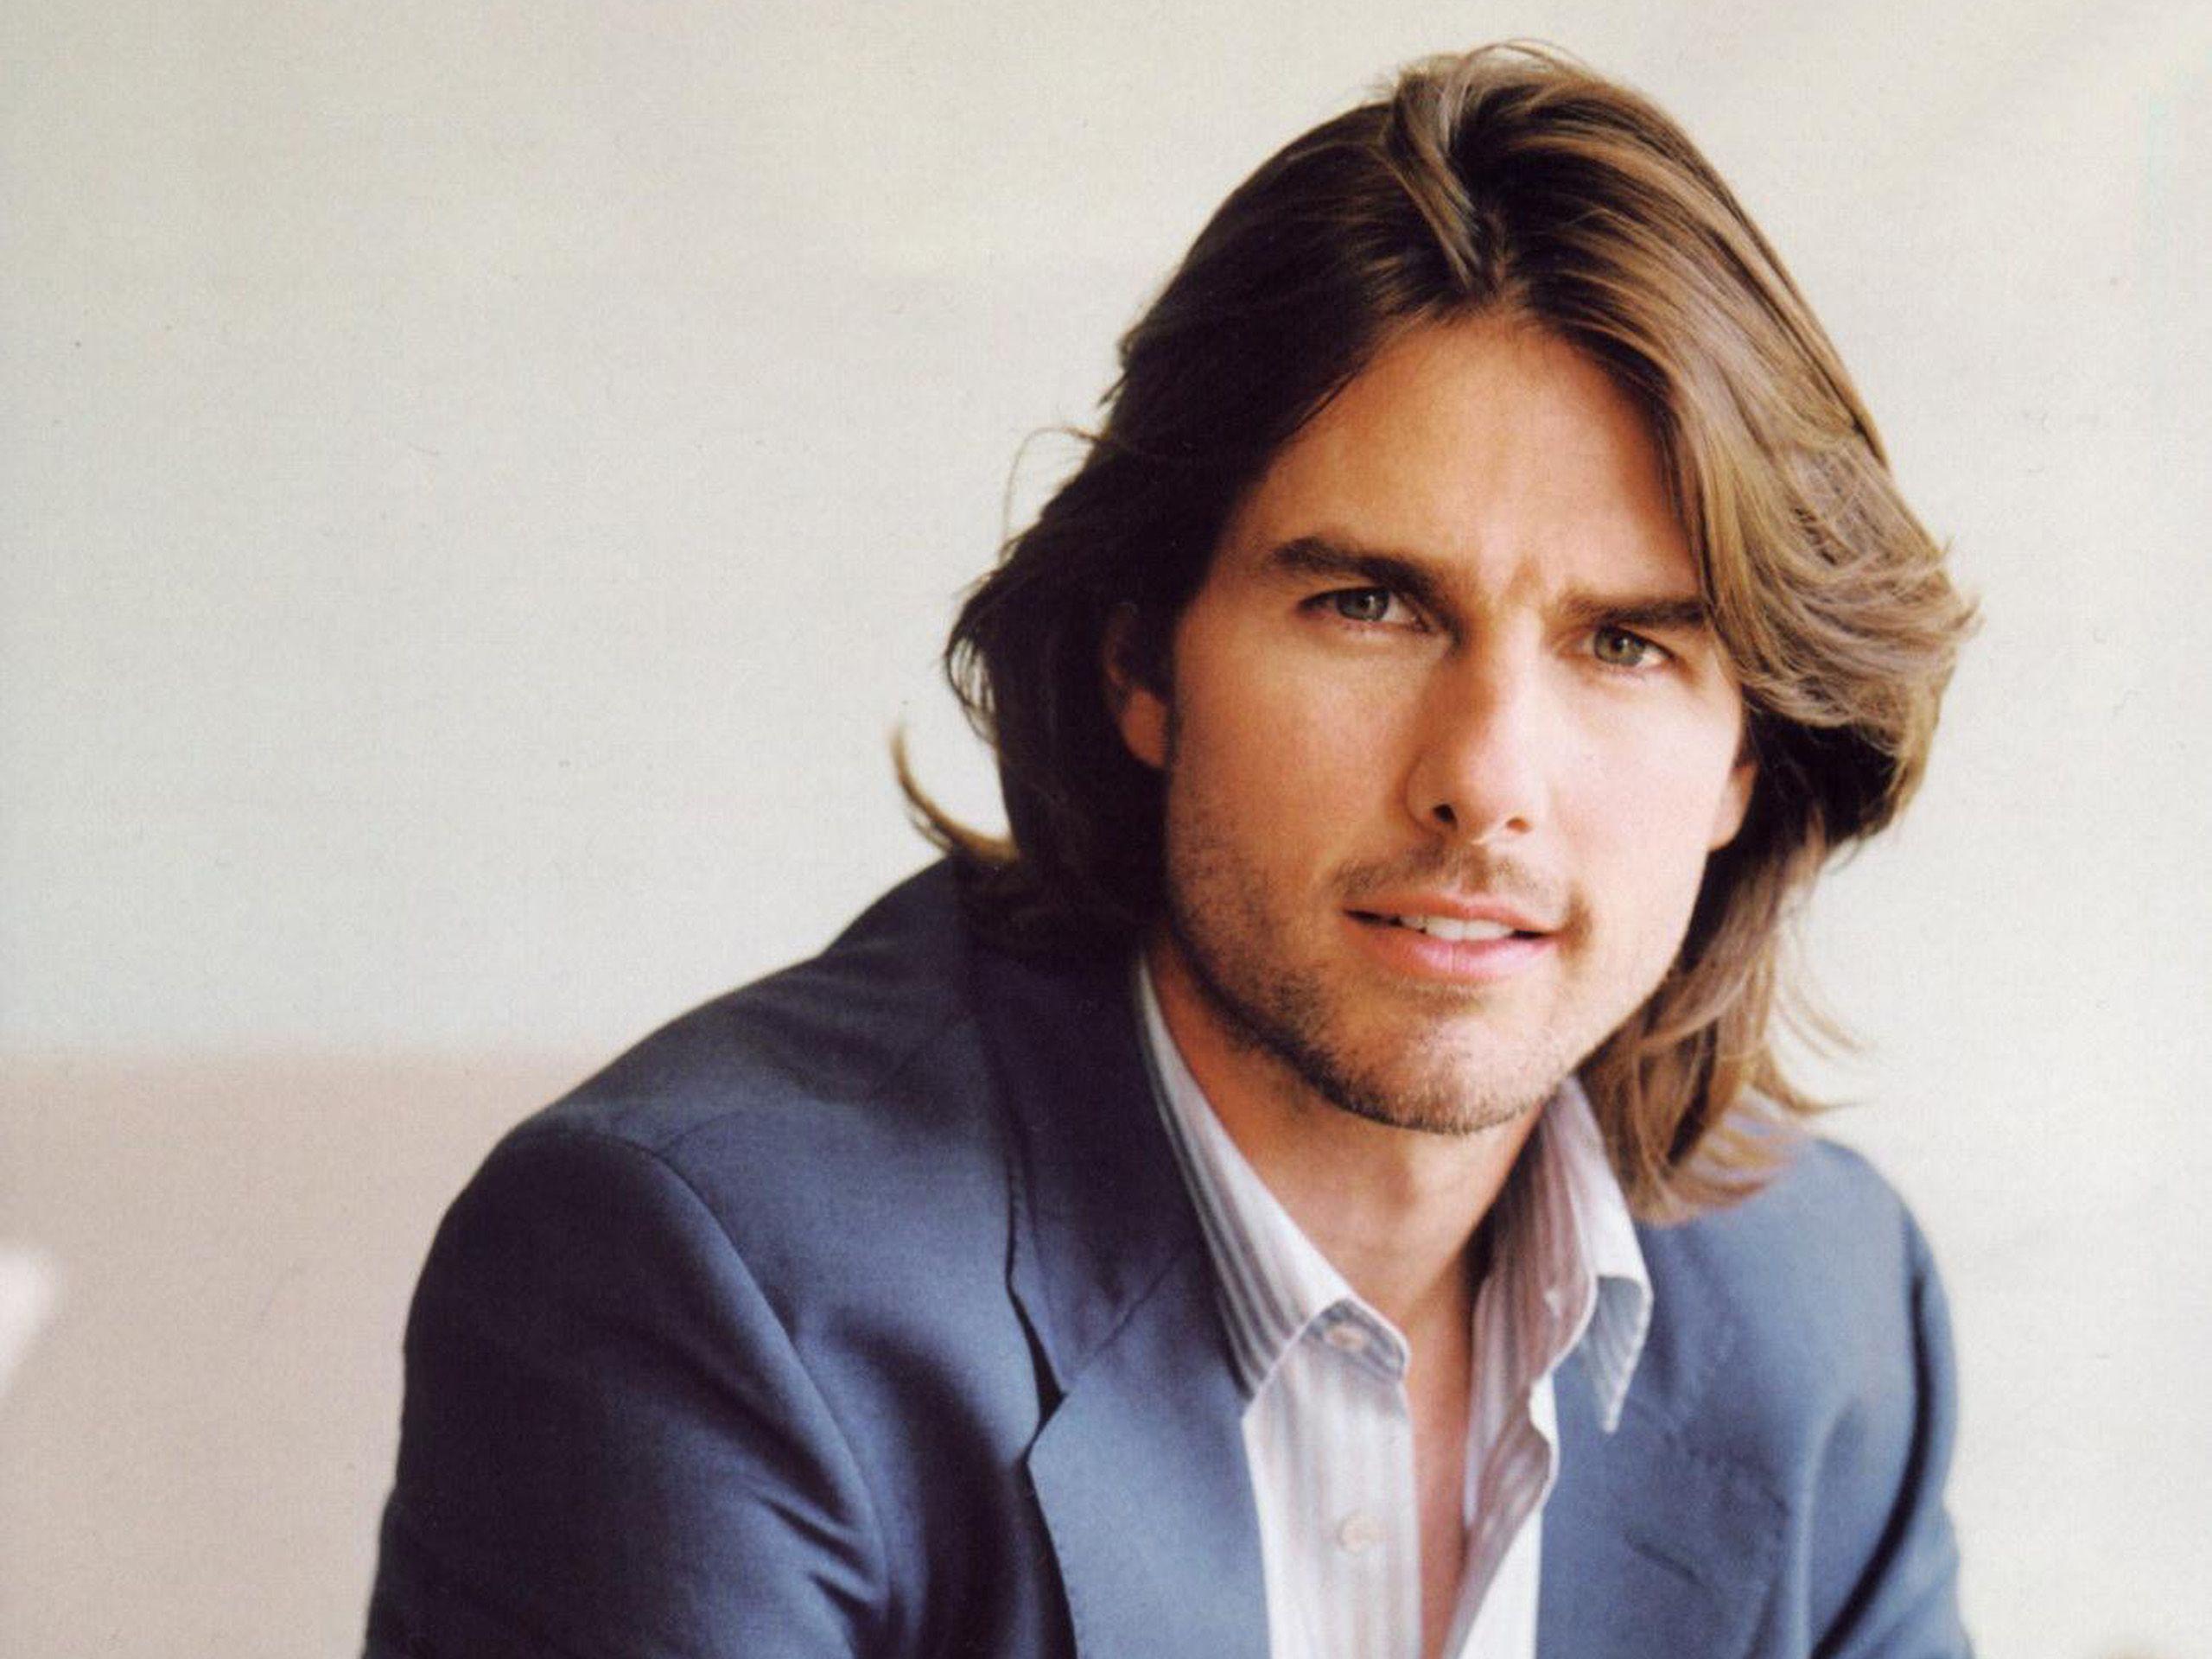 Handsome Hollywood Star Tom Cruise Cool Long Hair Photo Gallery HD